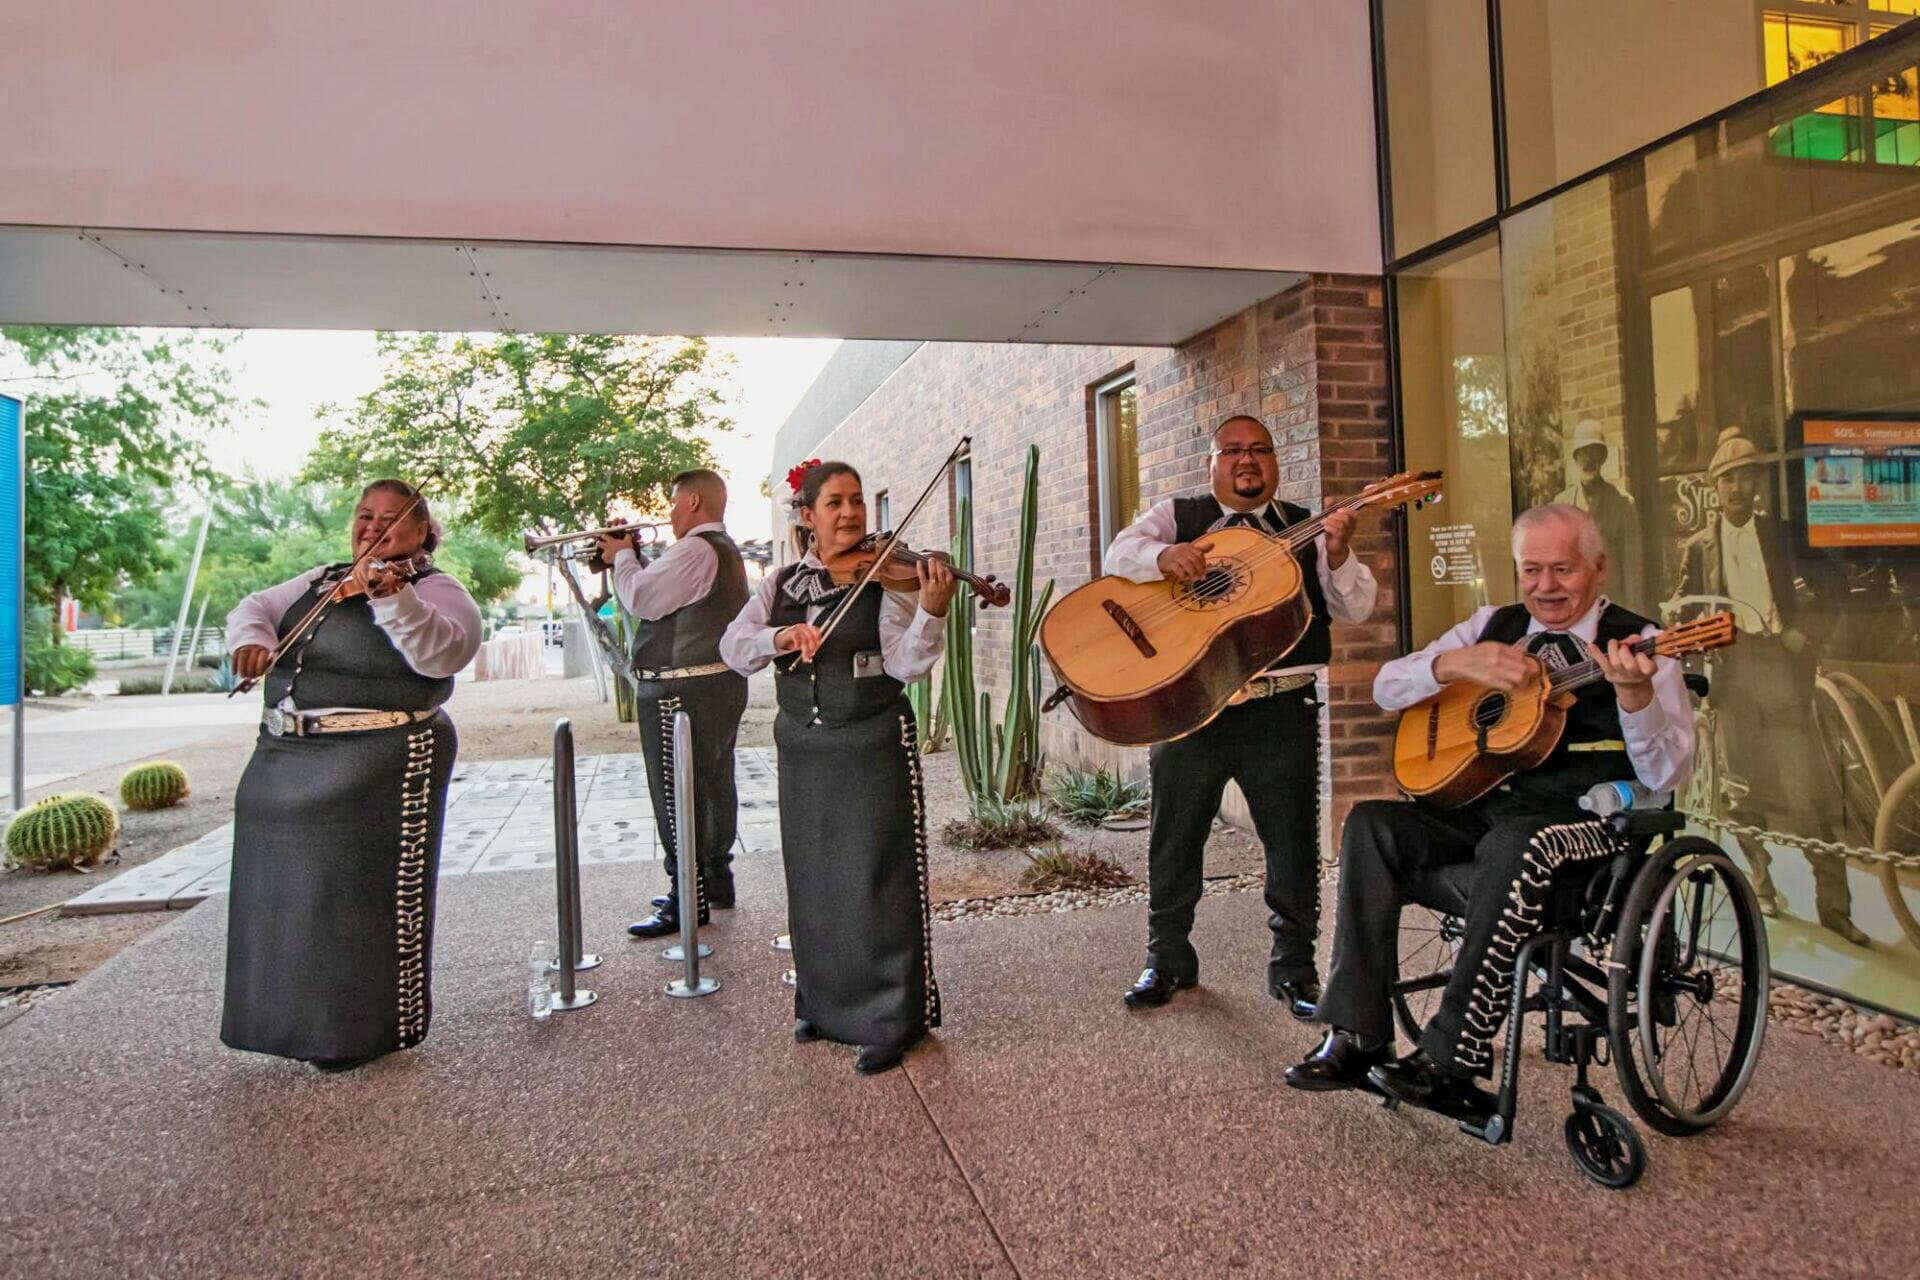 A 5-person Mariachi band plays music at the City of Tempe Tardeada event.